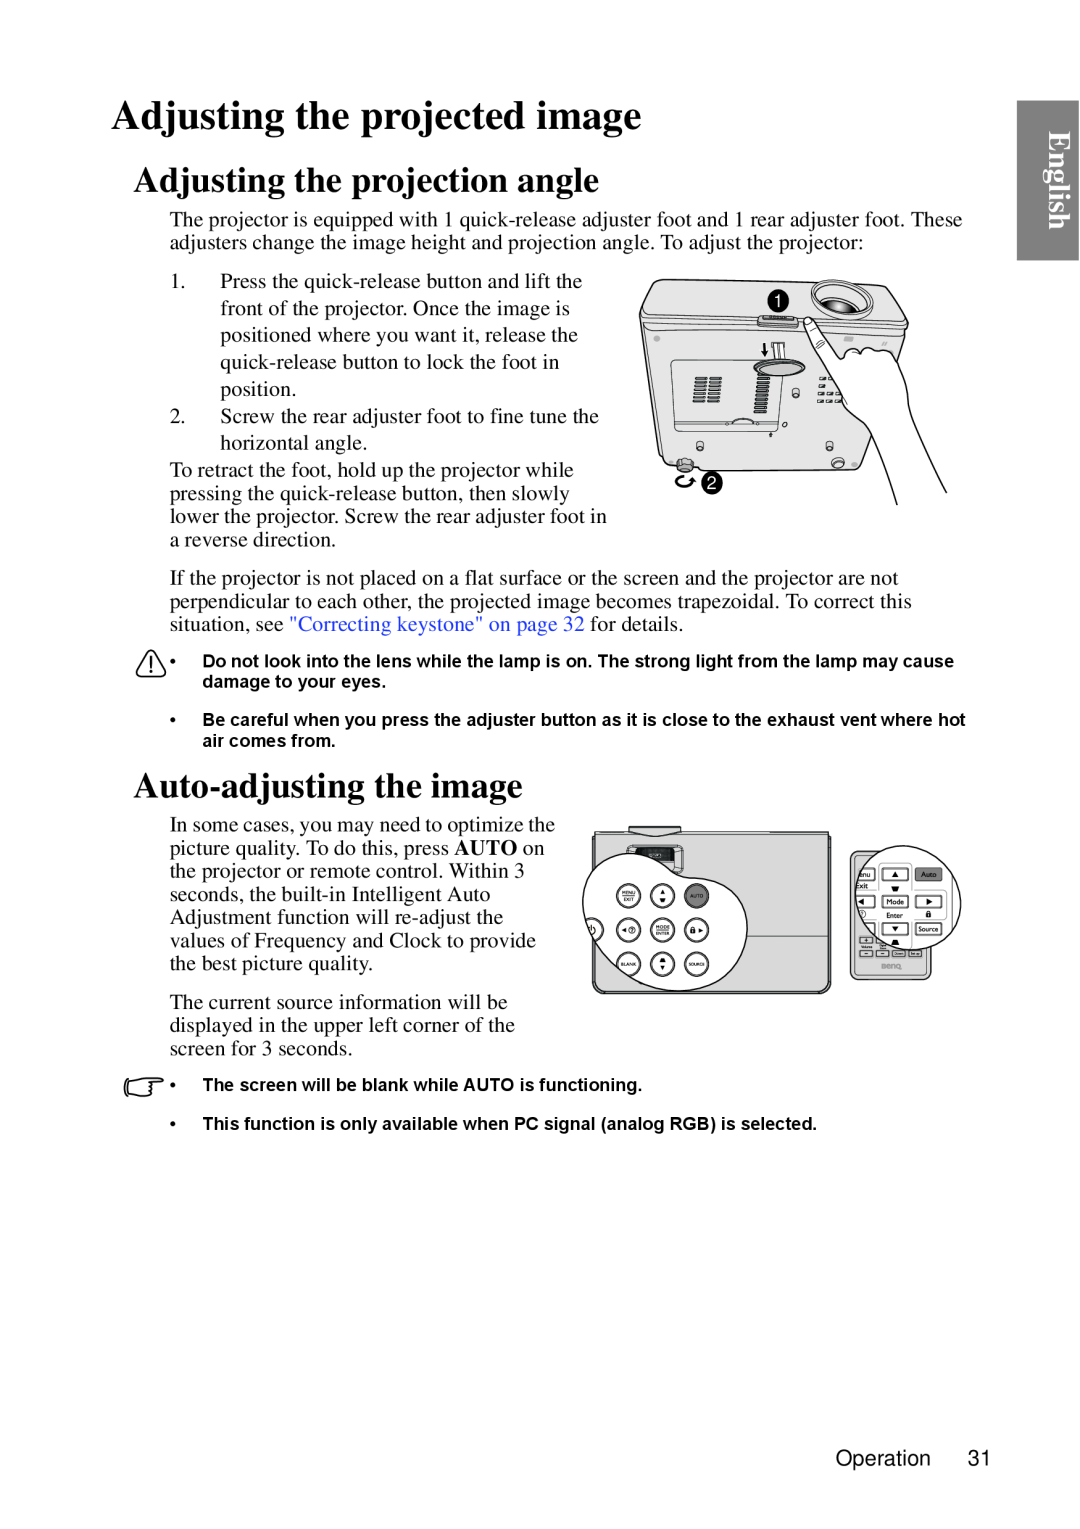 BenQ MP670 user manual Adjusting the projected image, Adjusting the projection angle, Auto-adjusting the image, English 